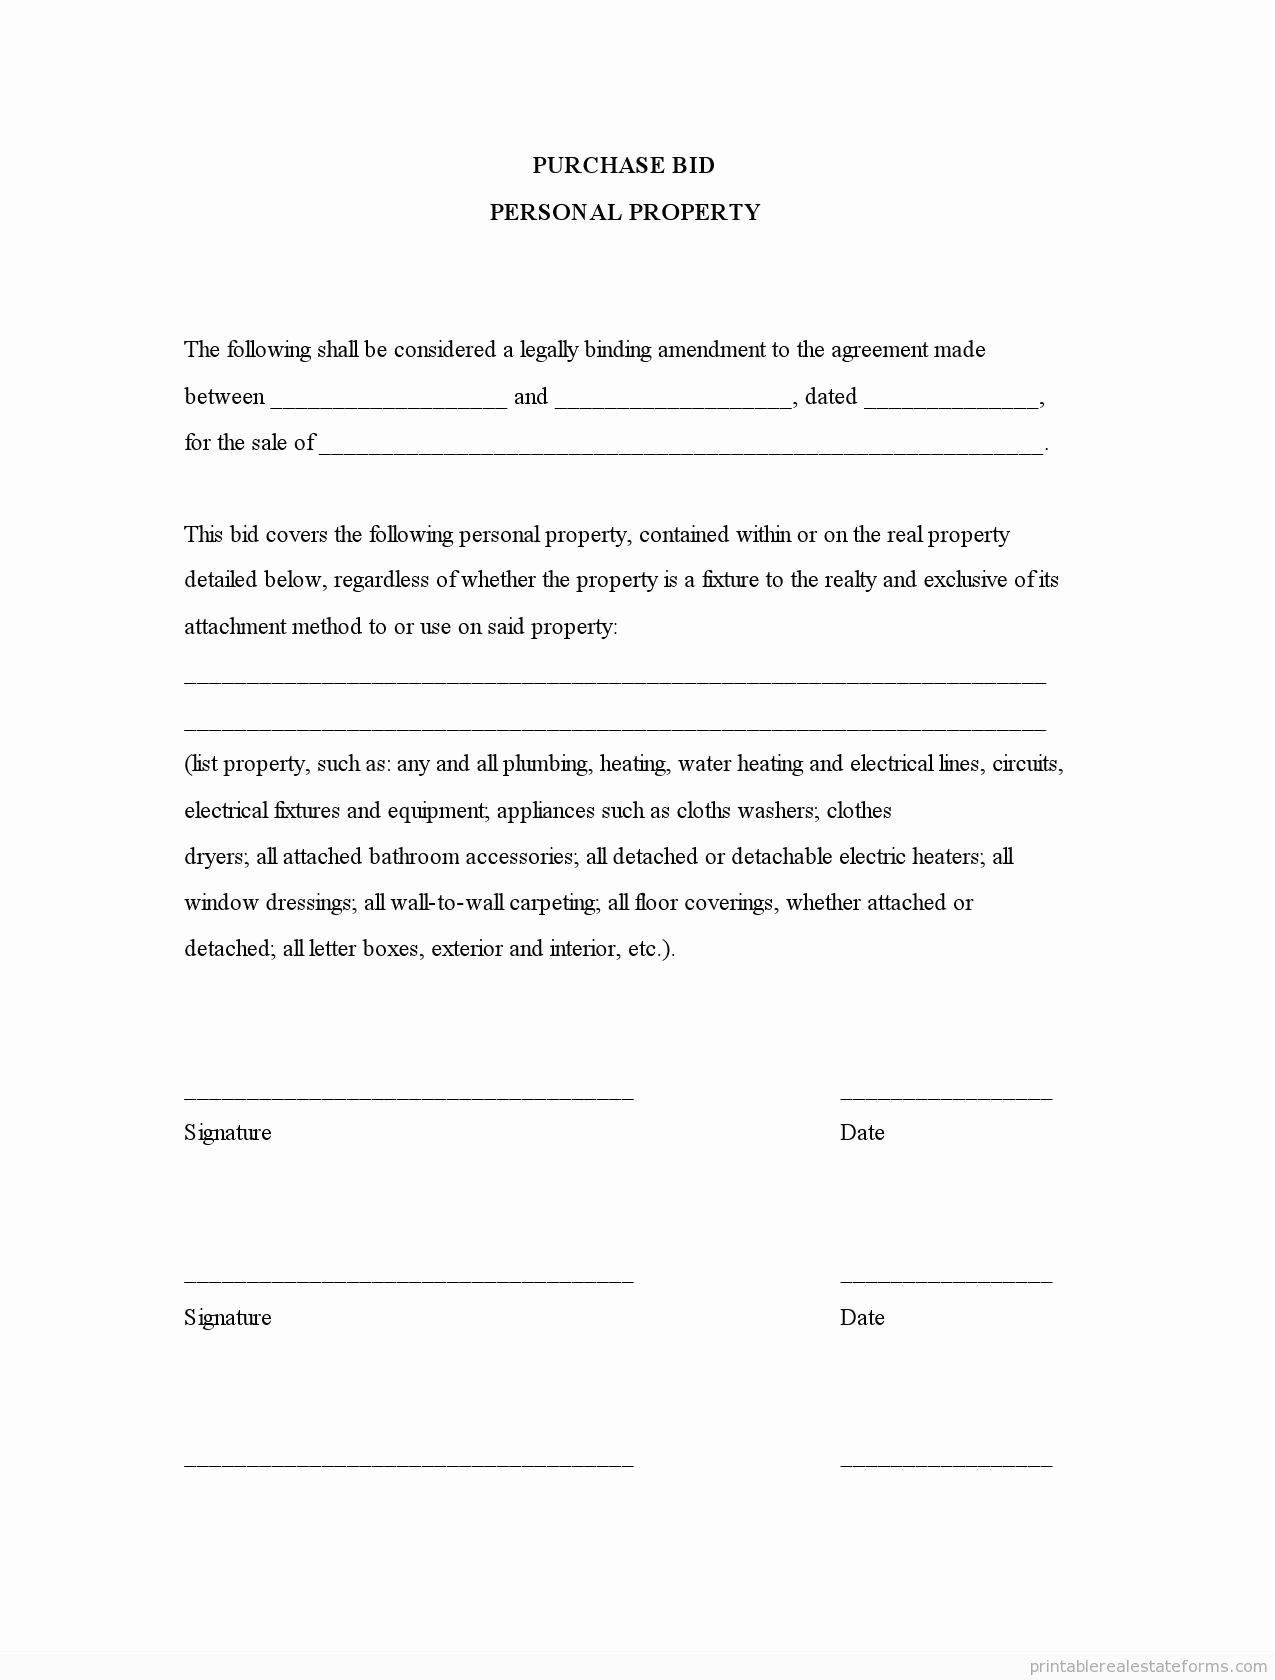 Personal Property Release form Template Elegant Sample Printable Purchase Bid Personal Property form